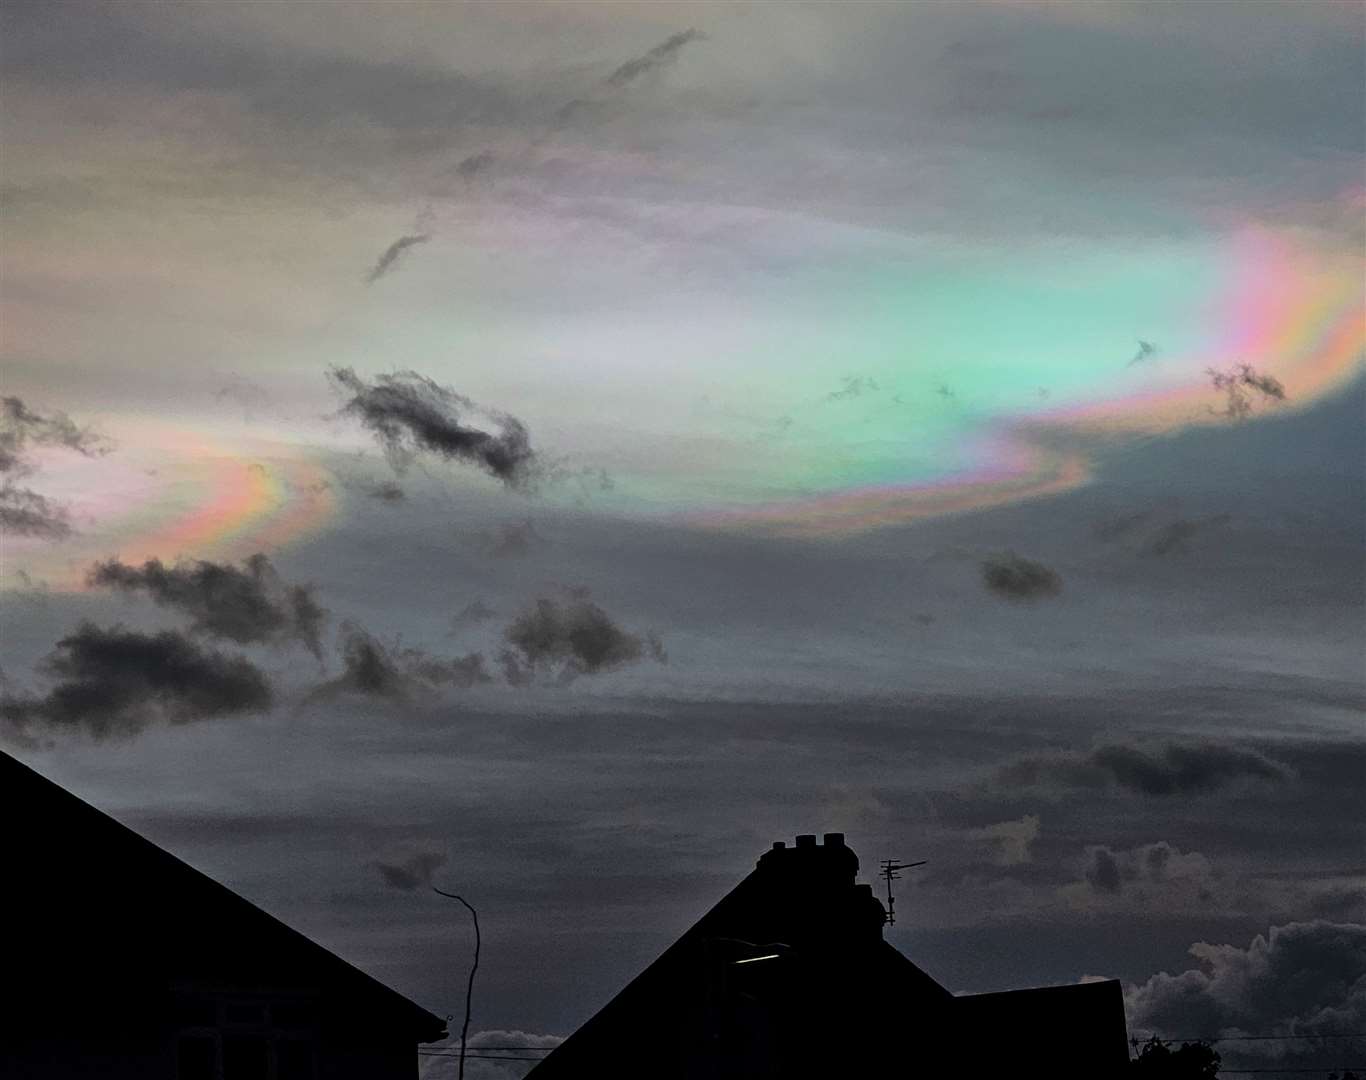 The rainbow clouds were also spotted above Maidstone this evening. Photo: Scott Farry